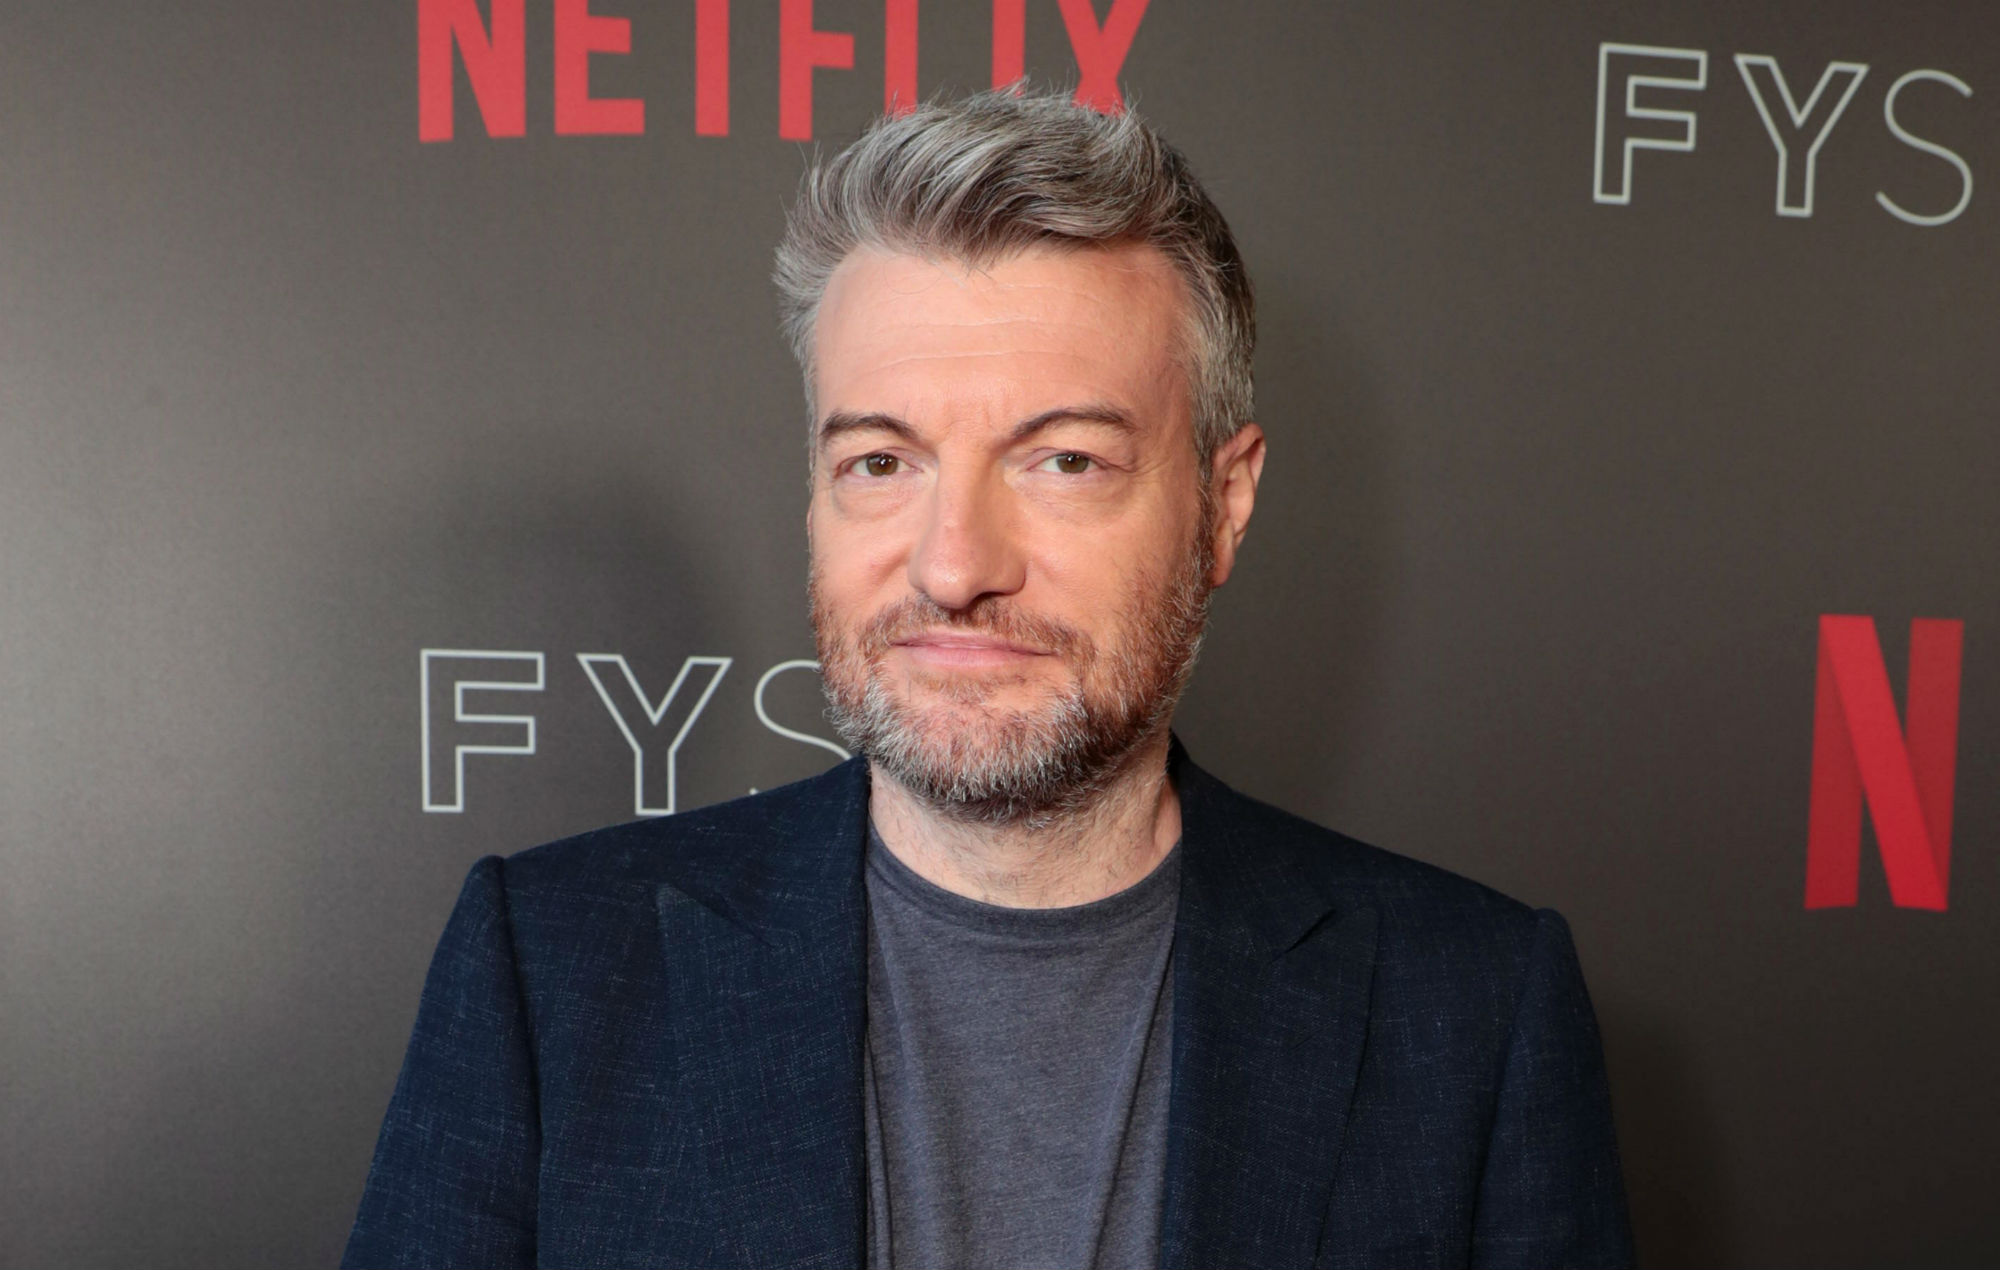 How tall is Charlie Brooker?